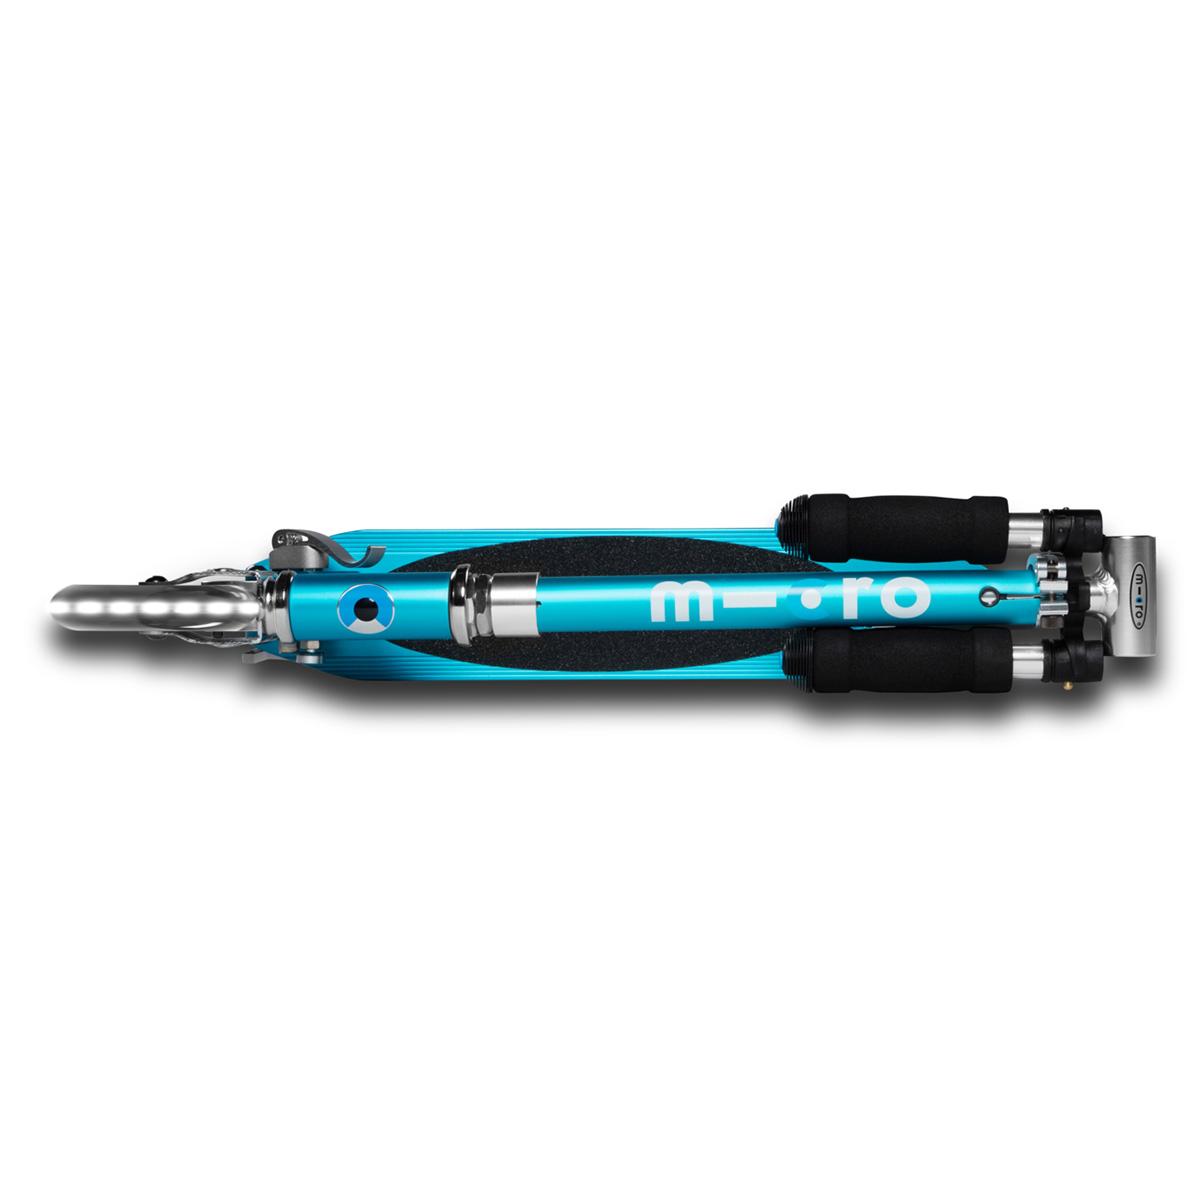 Selected image for Micro SPRITE Trotinet, LED, Ocean Blue